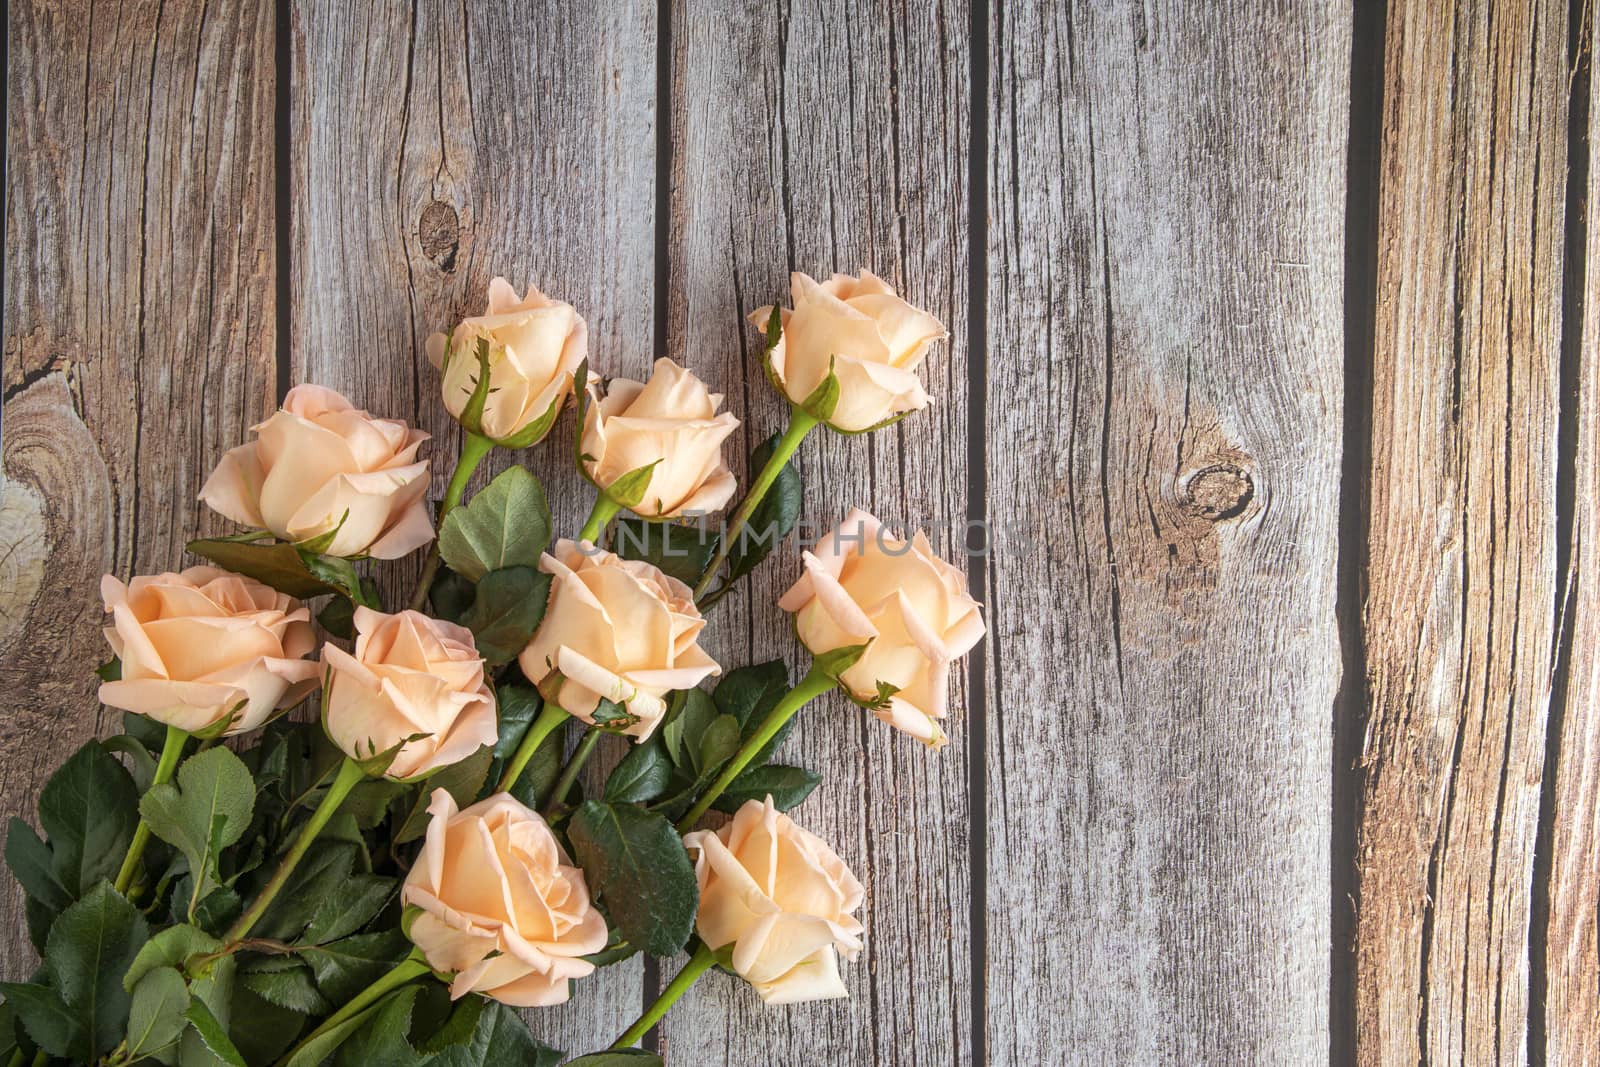 Flat view image of a bouquet of peach color roses, on brown wooden background